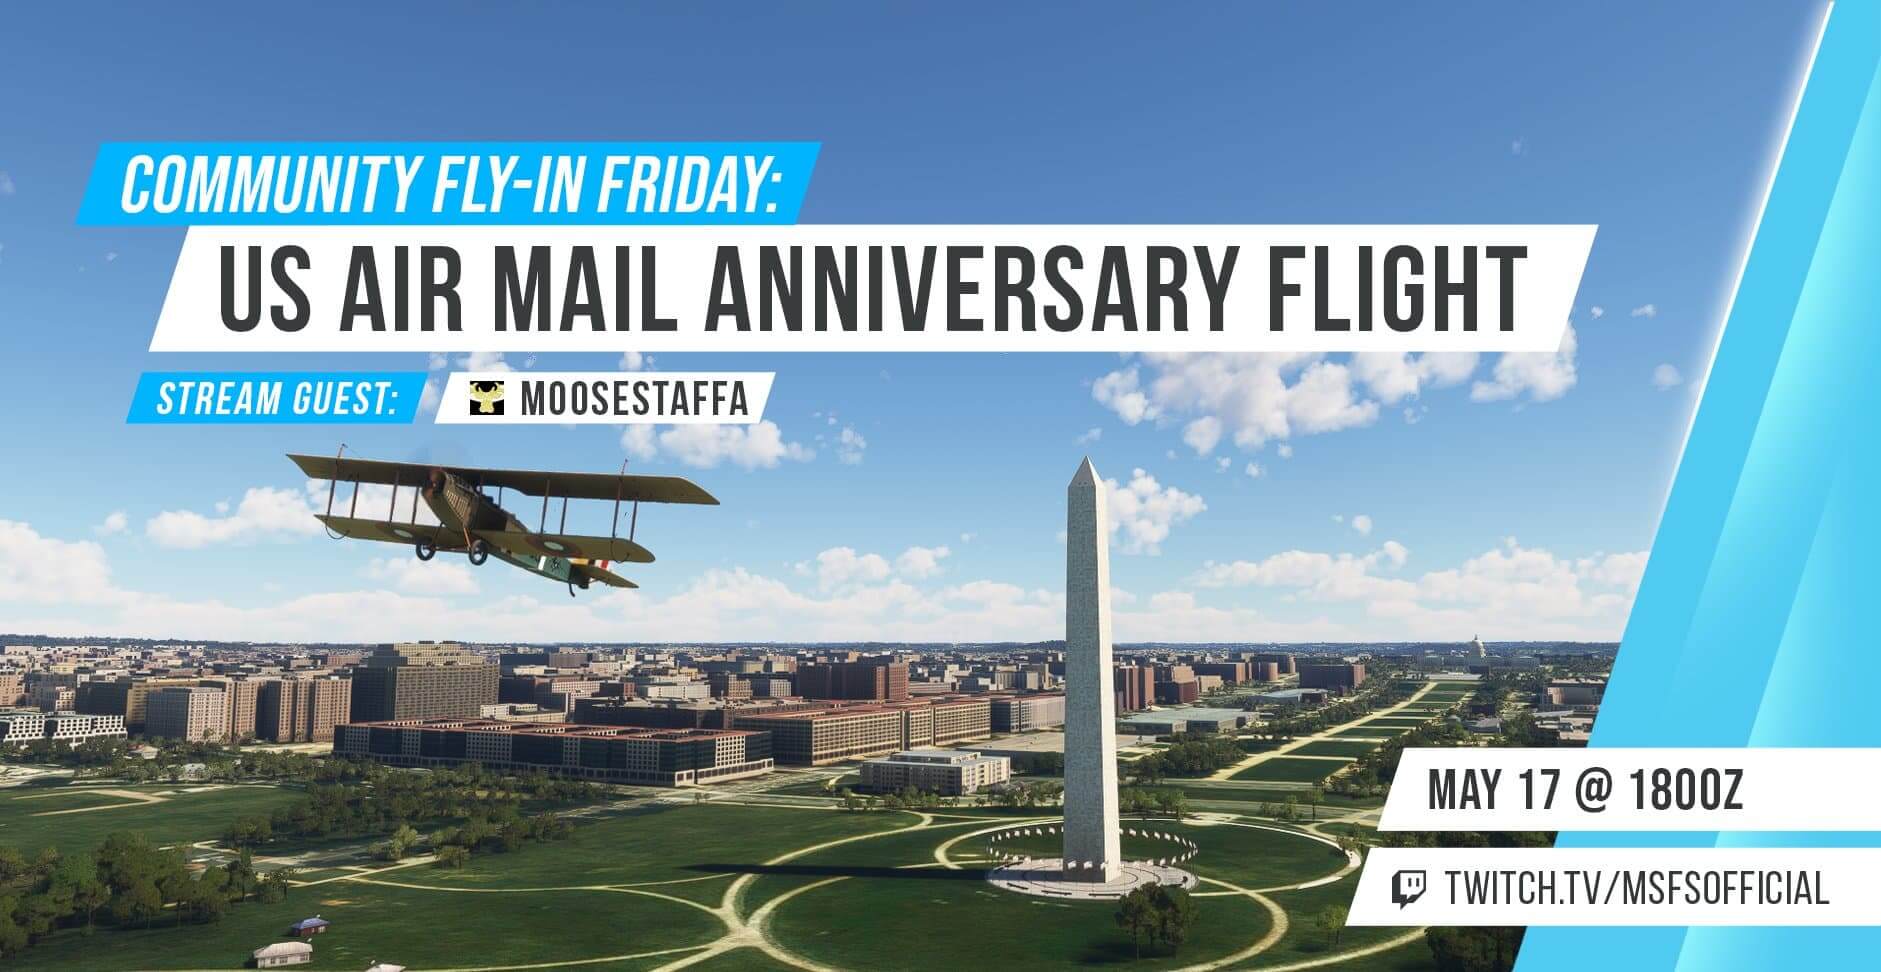 Community Fly-In Friday: US Air Mail Anniversary Flight. May 17th at 1800 UTC. twitch.tv/msfsofficial